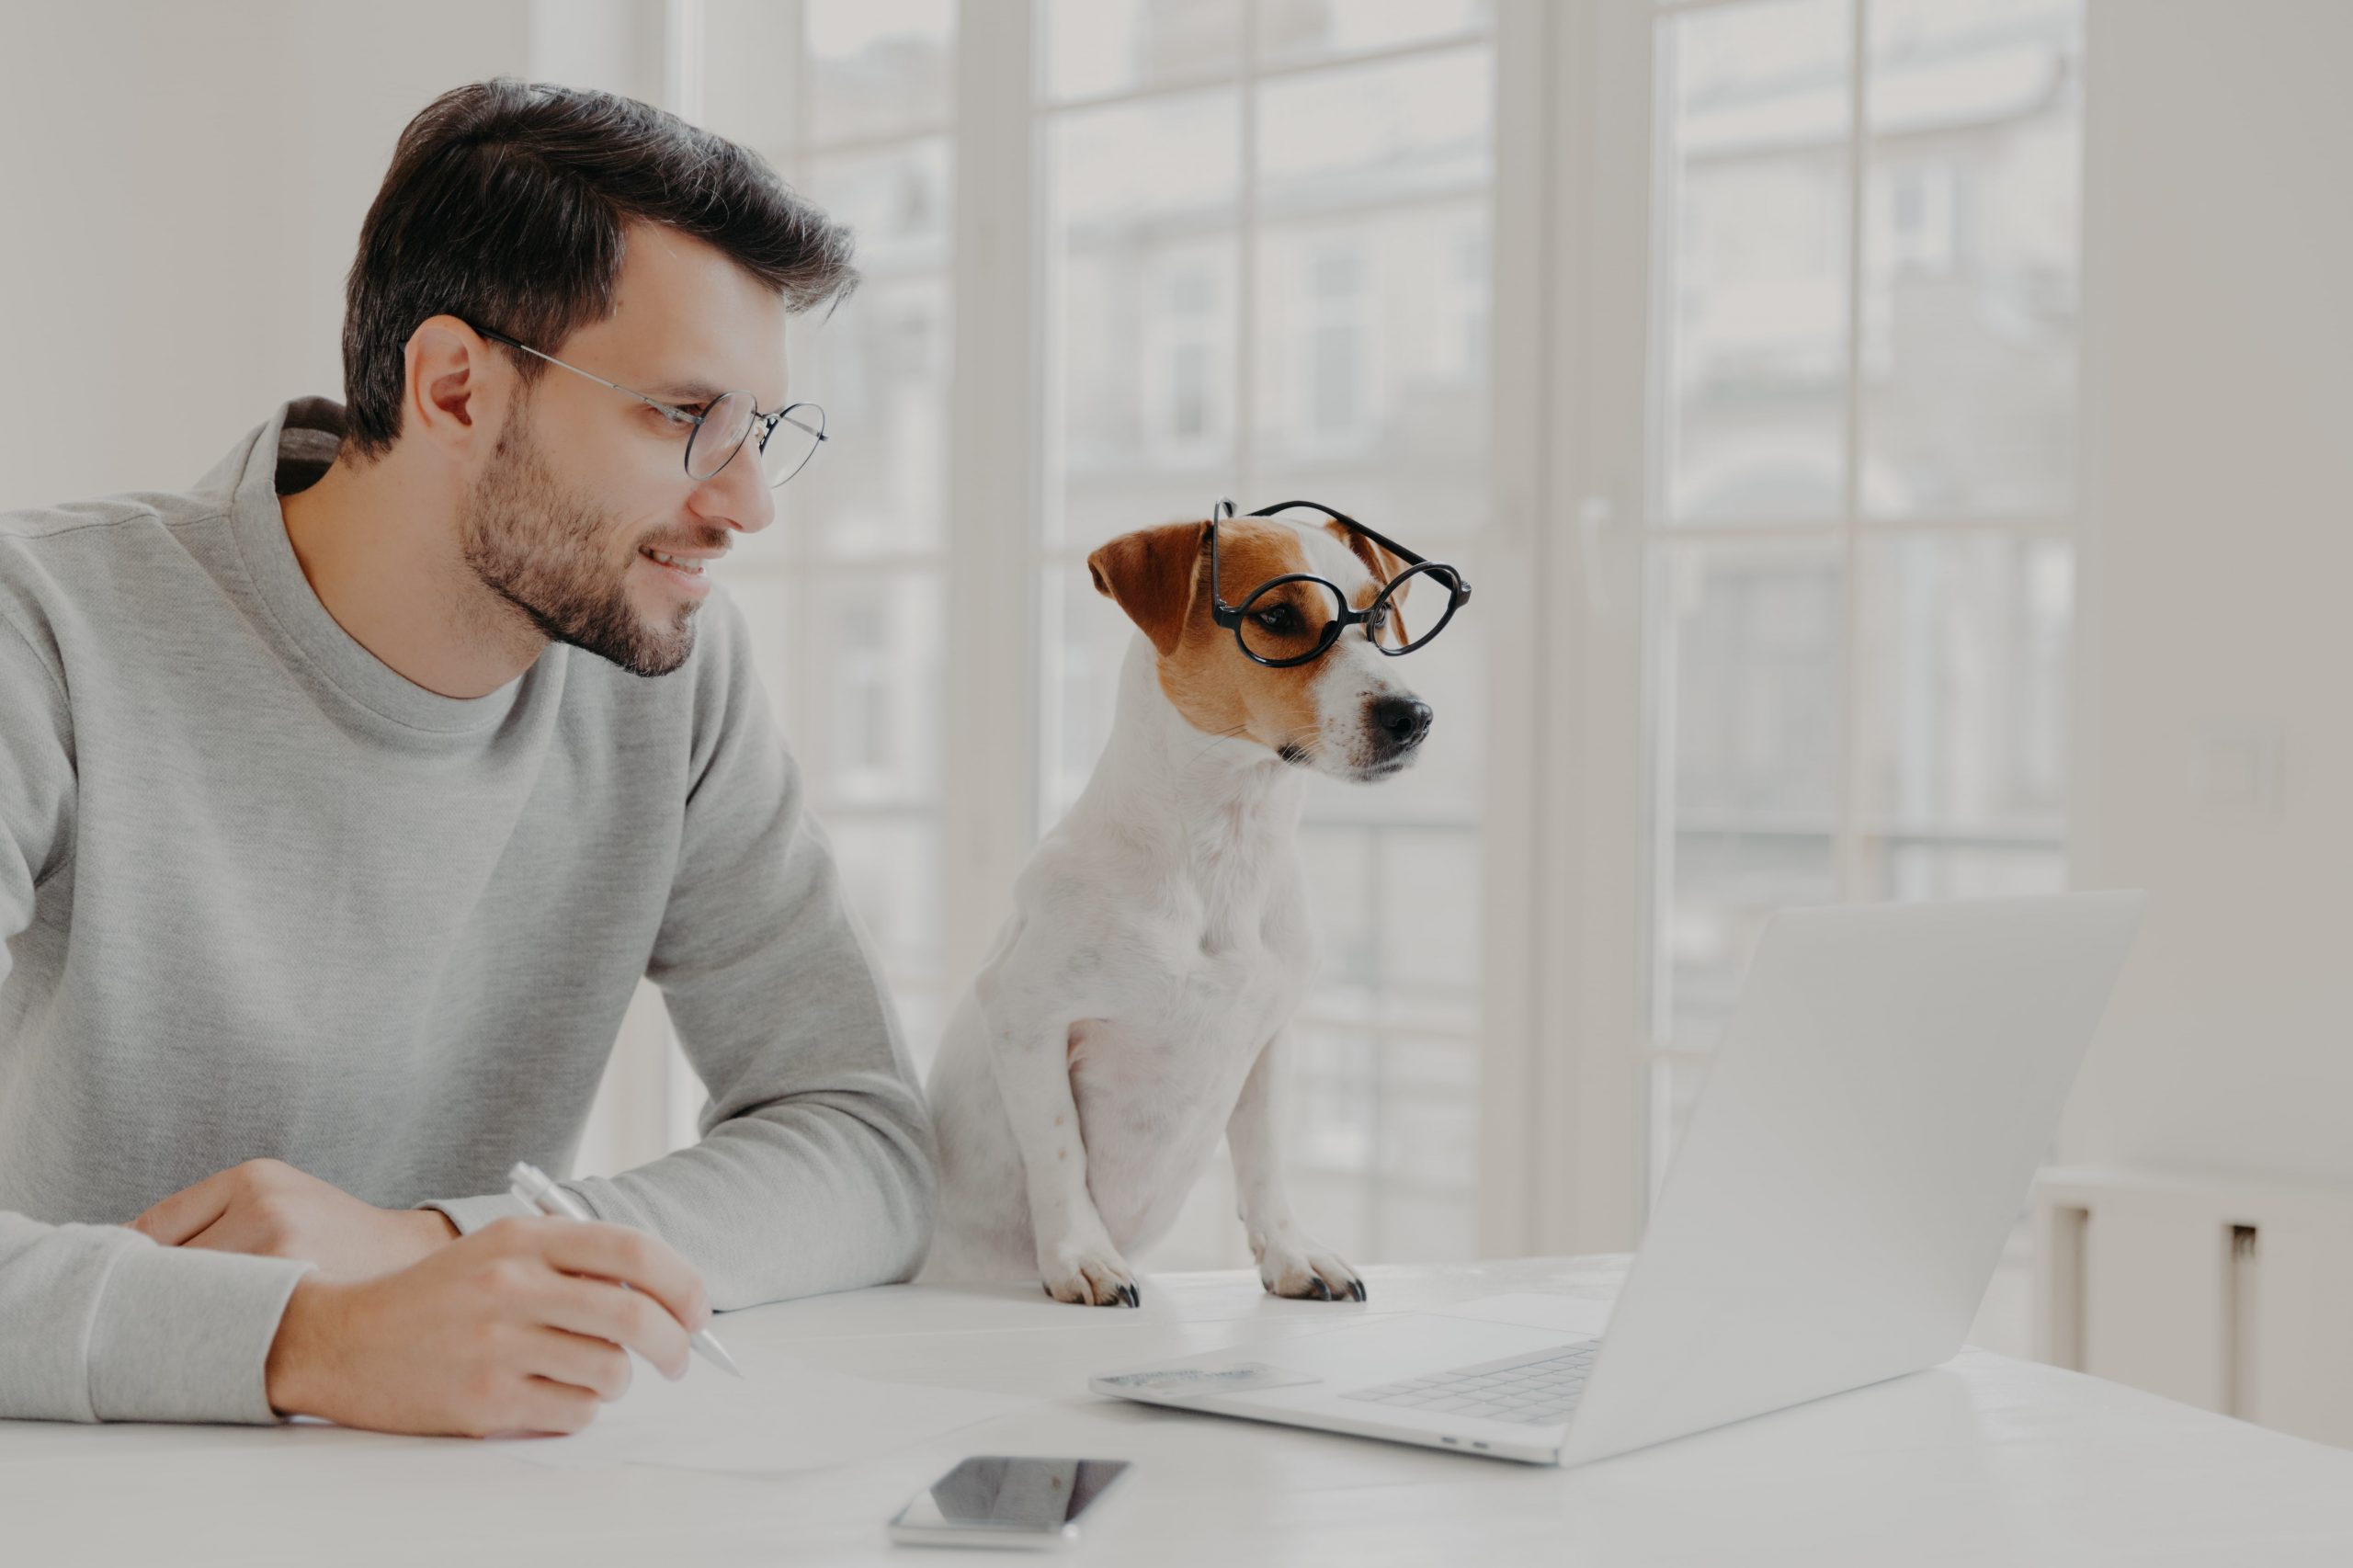 Top 5 Pet Related Business Ideas